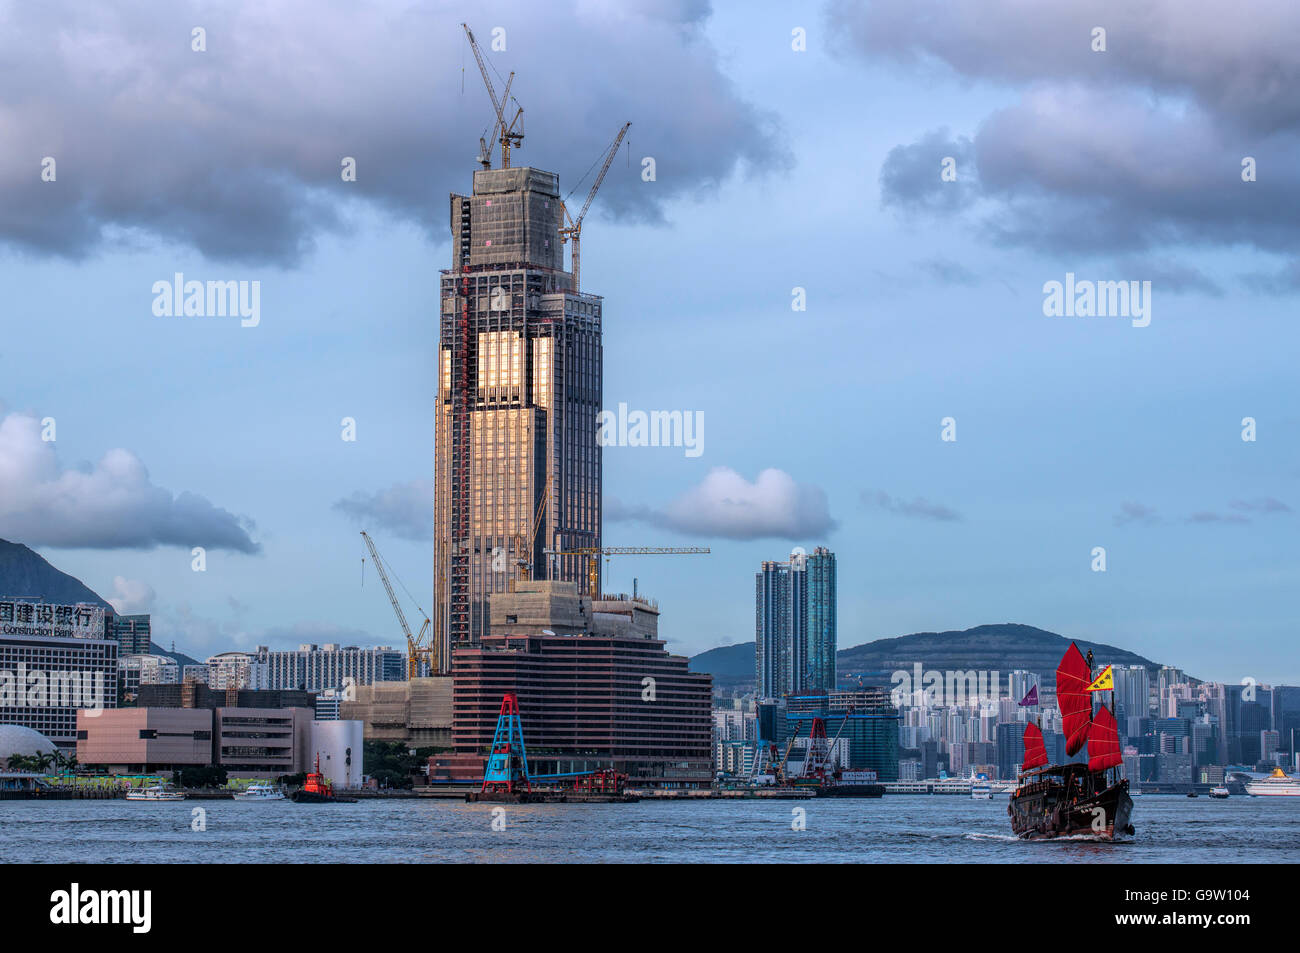 The new Kowloon skyline and new buildings under construction, Hong Kong, China. Stock Photo